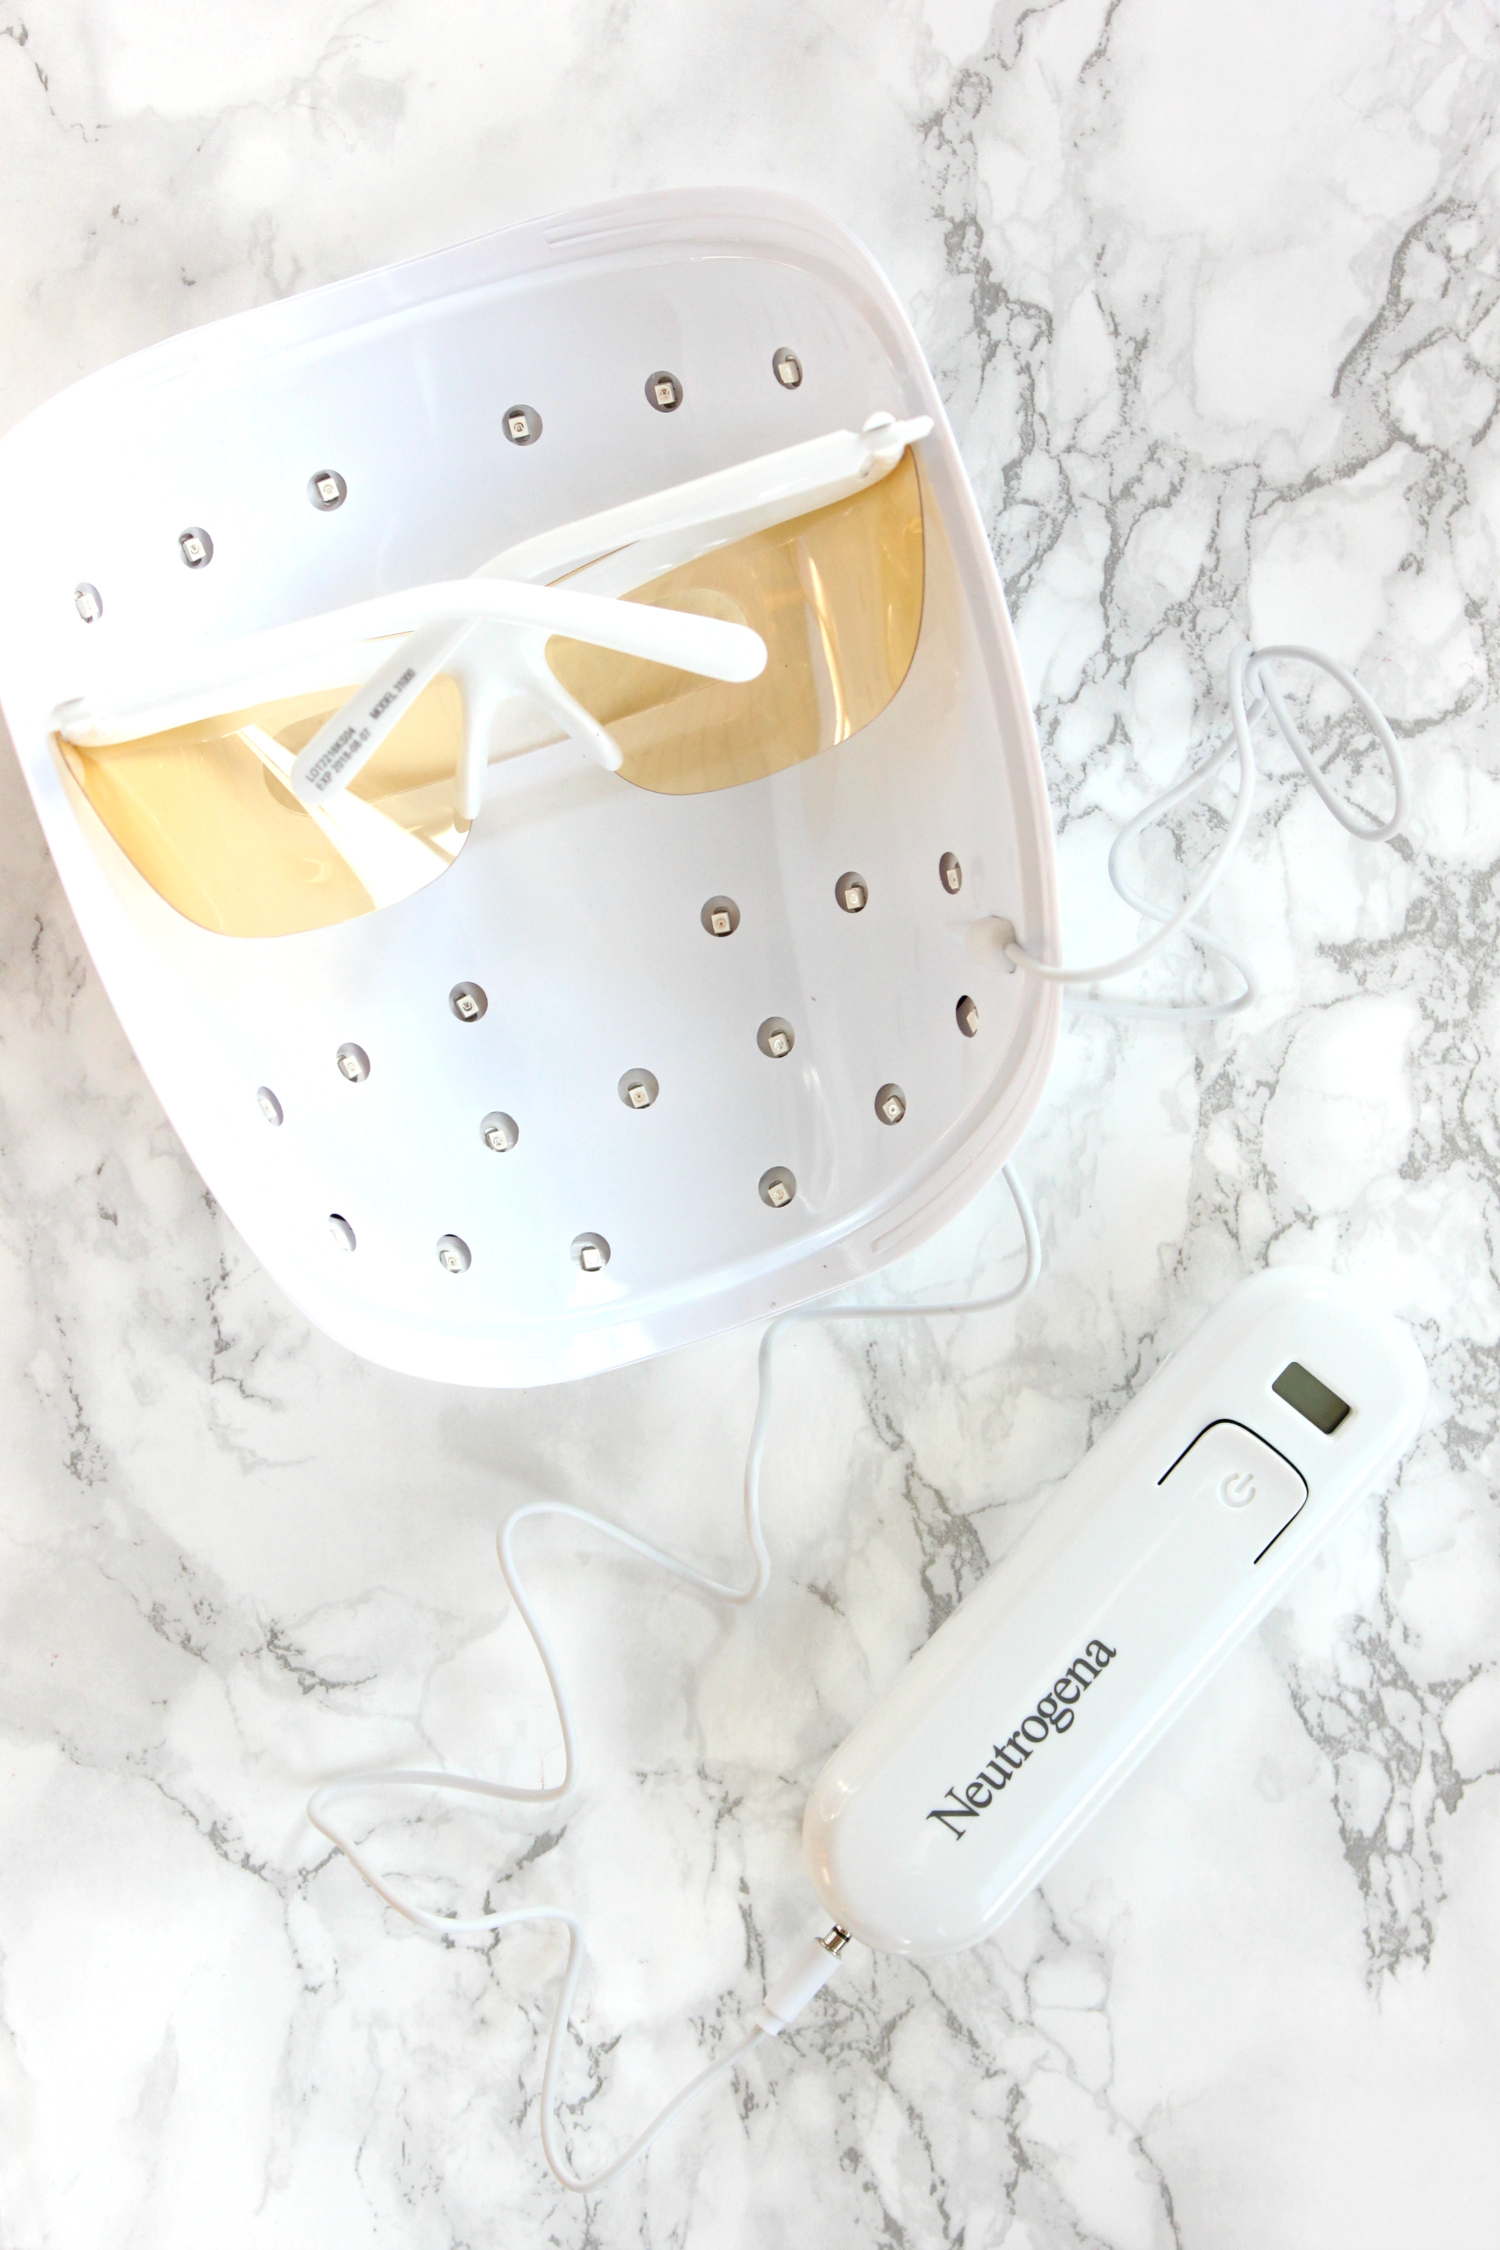 Testing out the power of light therapy to treat breakouts with the new Neutrogena Light Therapy Acne Mask